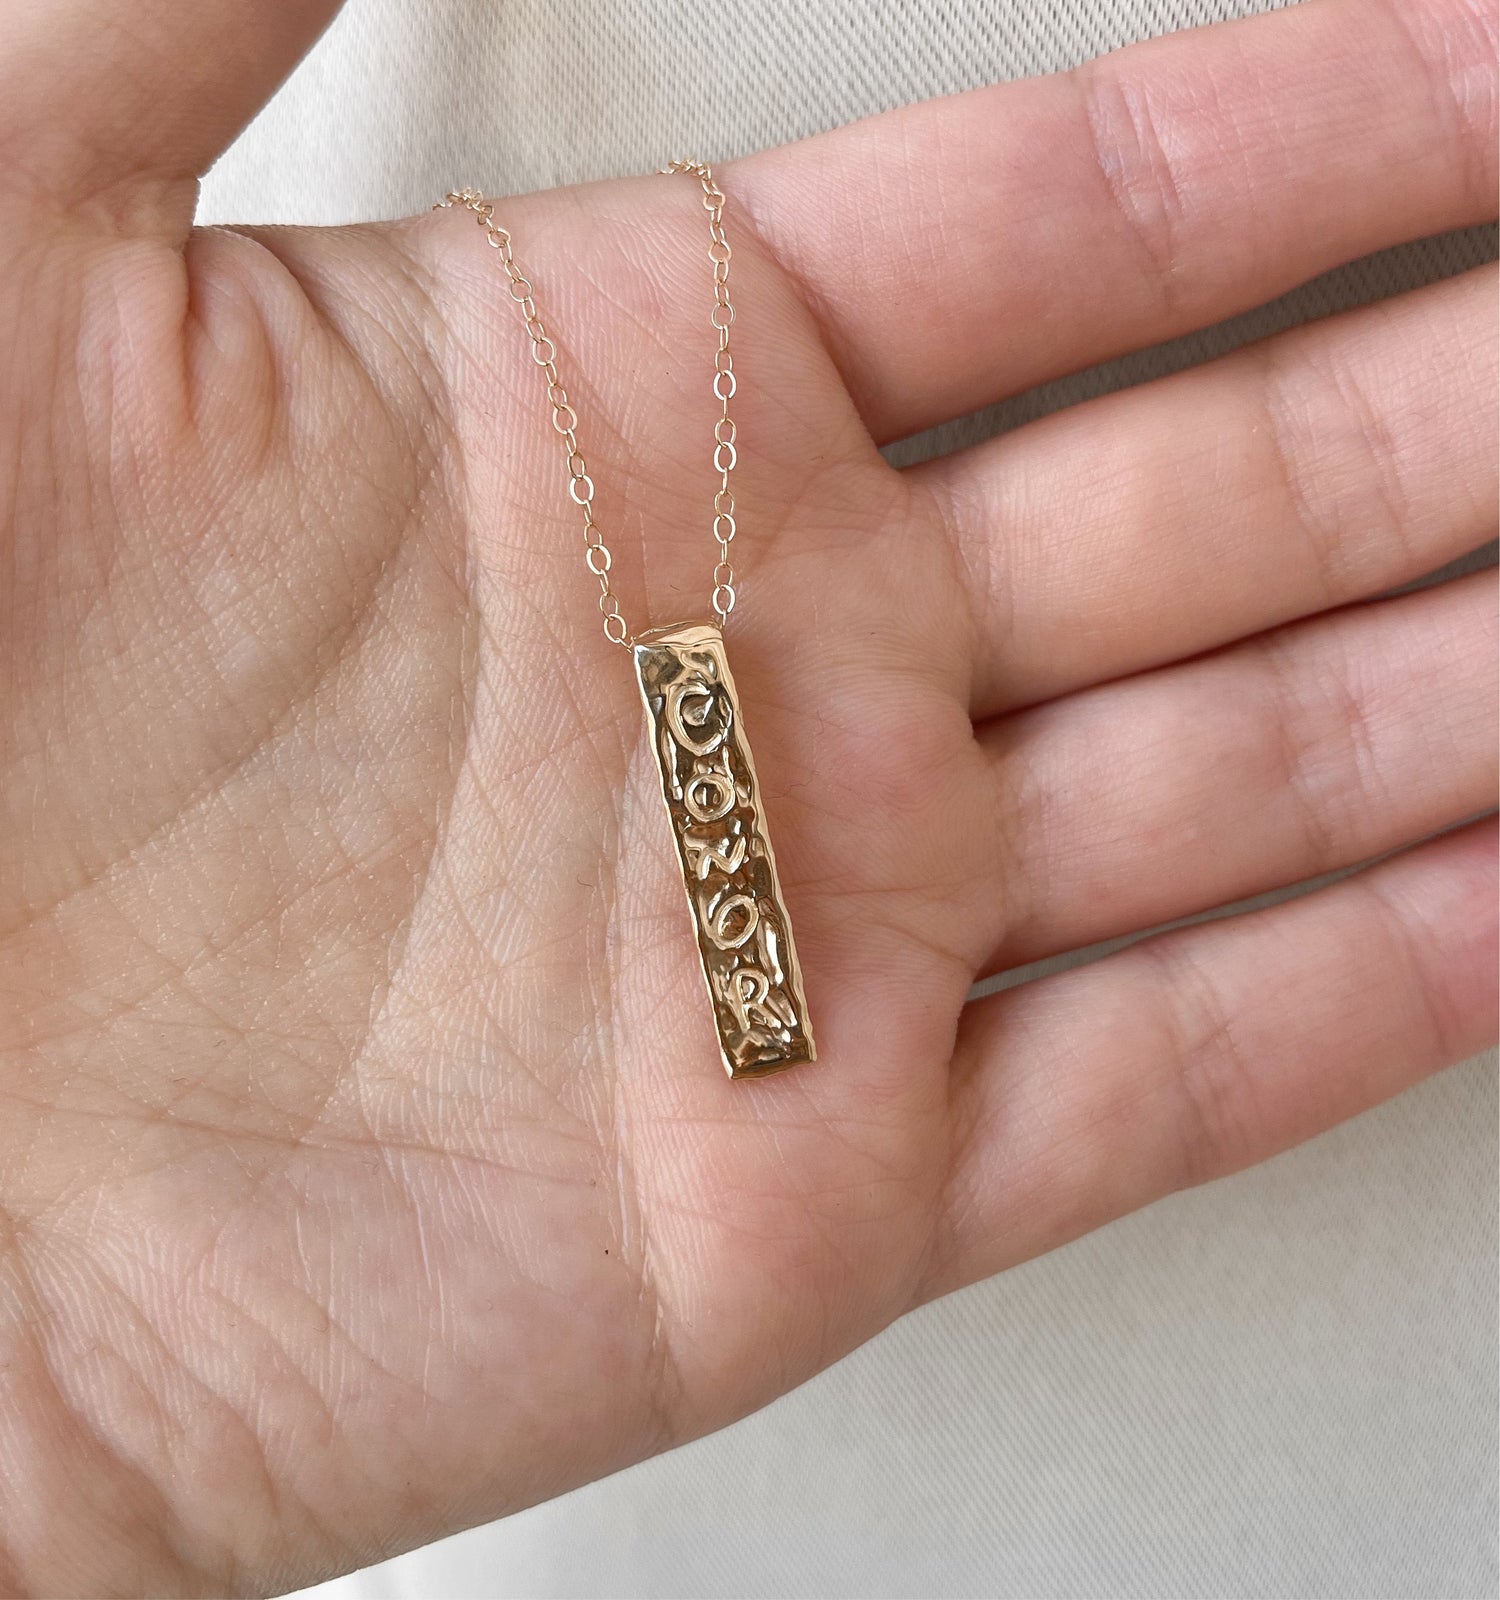 Custom Name Plate Necklace